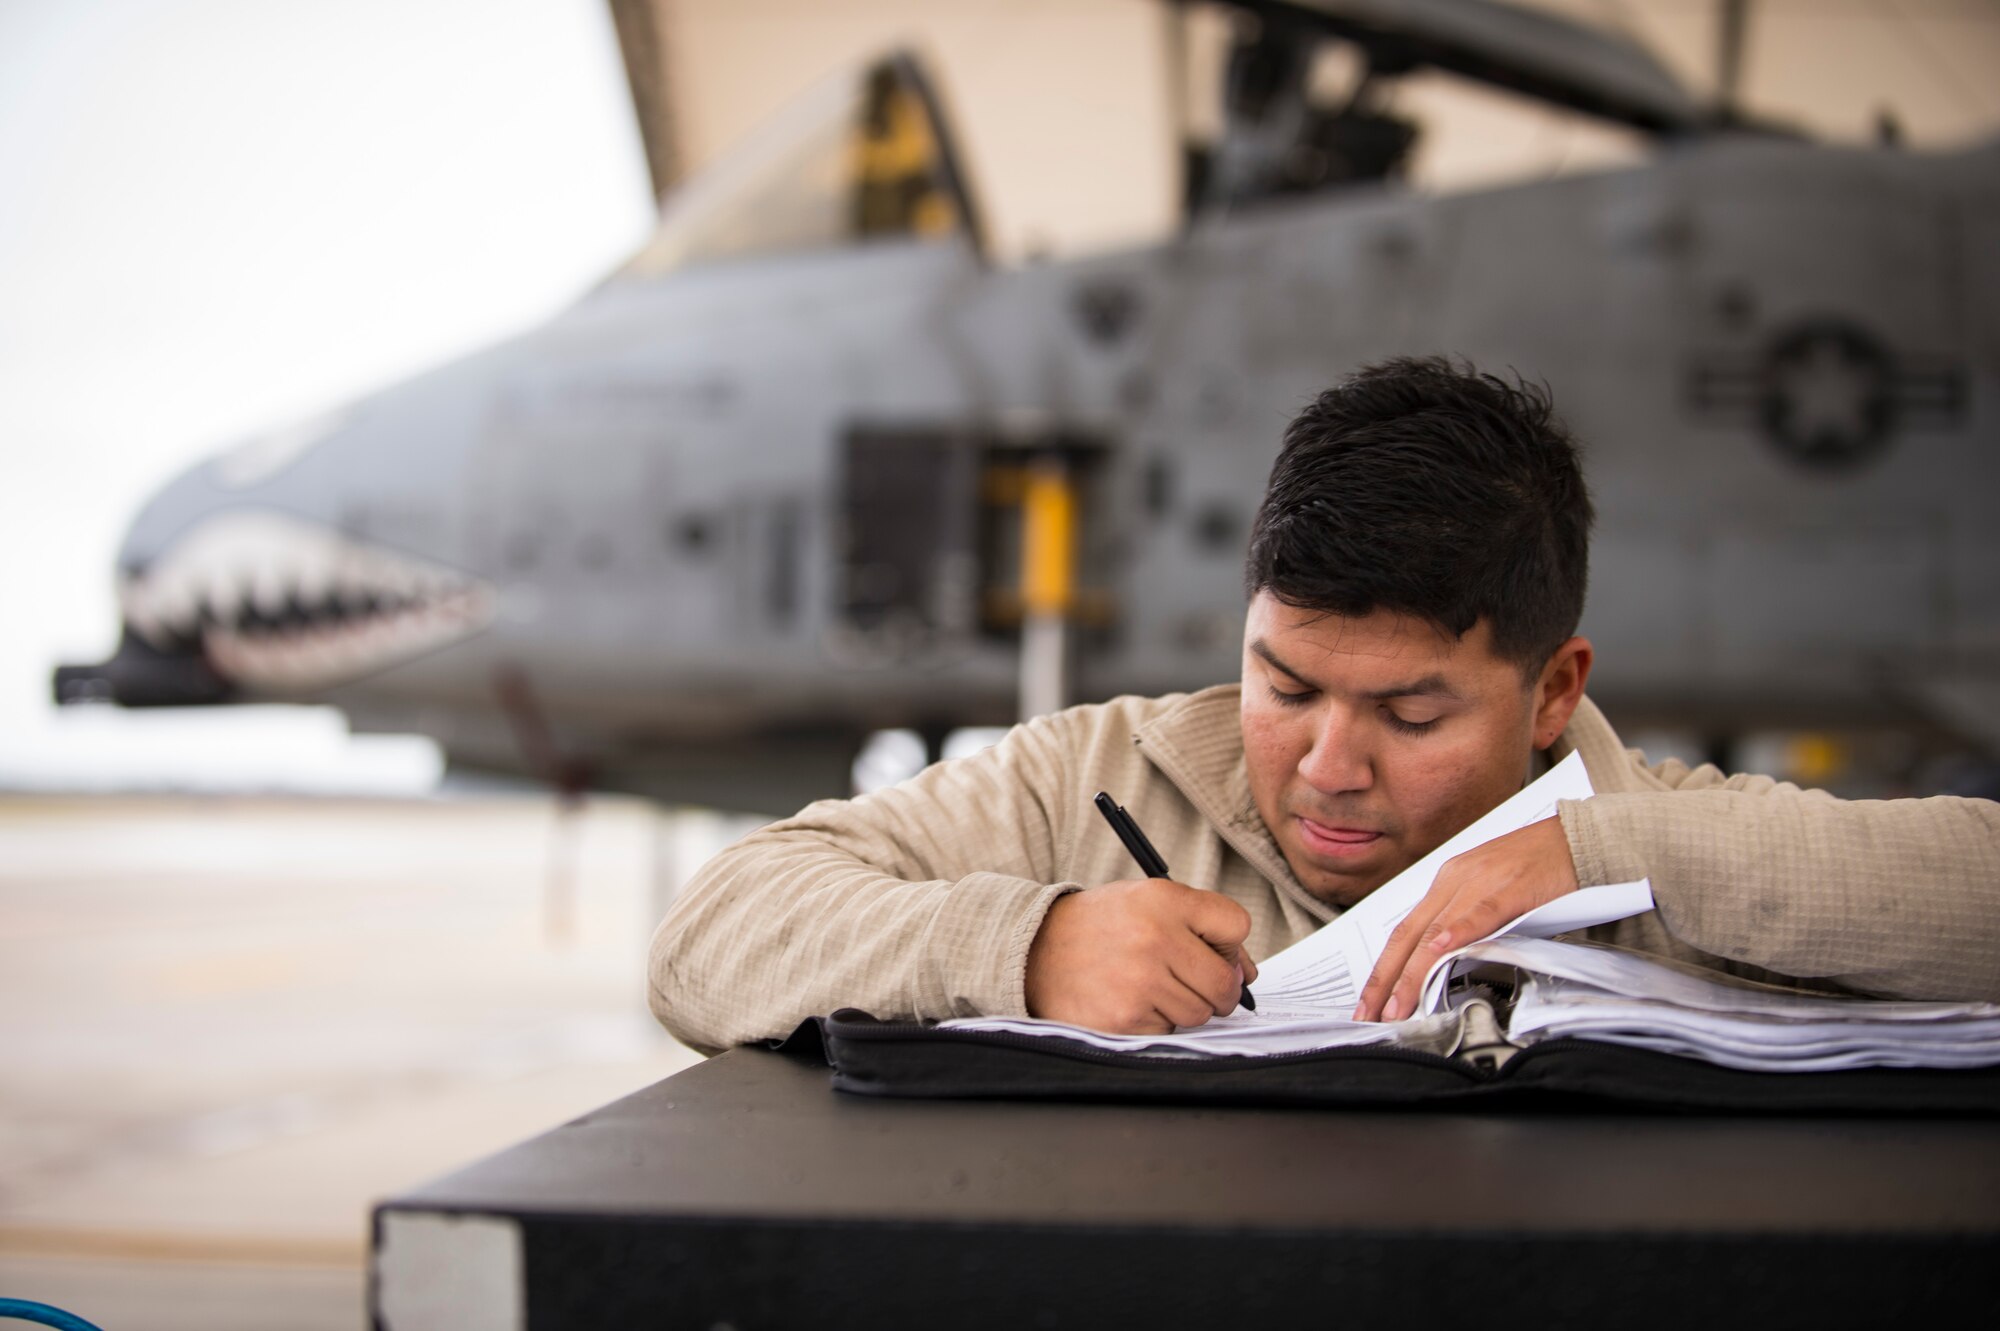 A crew chief documents maintenance performed on a A-10C Thunderbolt II during a thru flight inspection, Dec. 7, 2017, at Moody Air Force Base, Ga. Moody recently participated in a week-long, Phase 1, Phase 2 exercise designed to demonstrate the 23d Wing’s ability to meet combatant commander objectives. The exercise tested pilots’ and maintainers’ ability to launch around-the-clock sorties at an accelerated rate during surge operations. (U.S. Air Force photo by Andrea Jenkins)